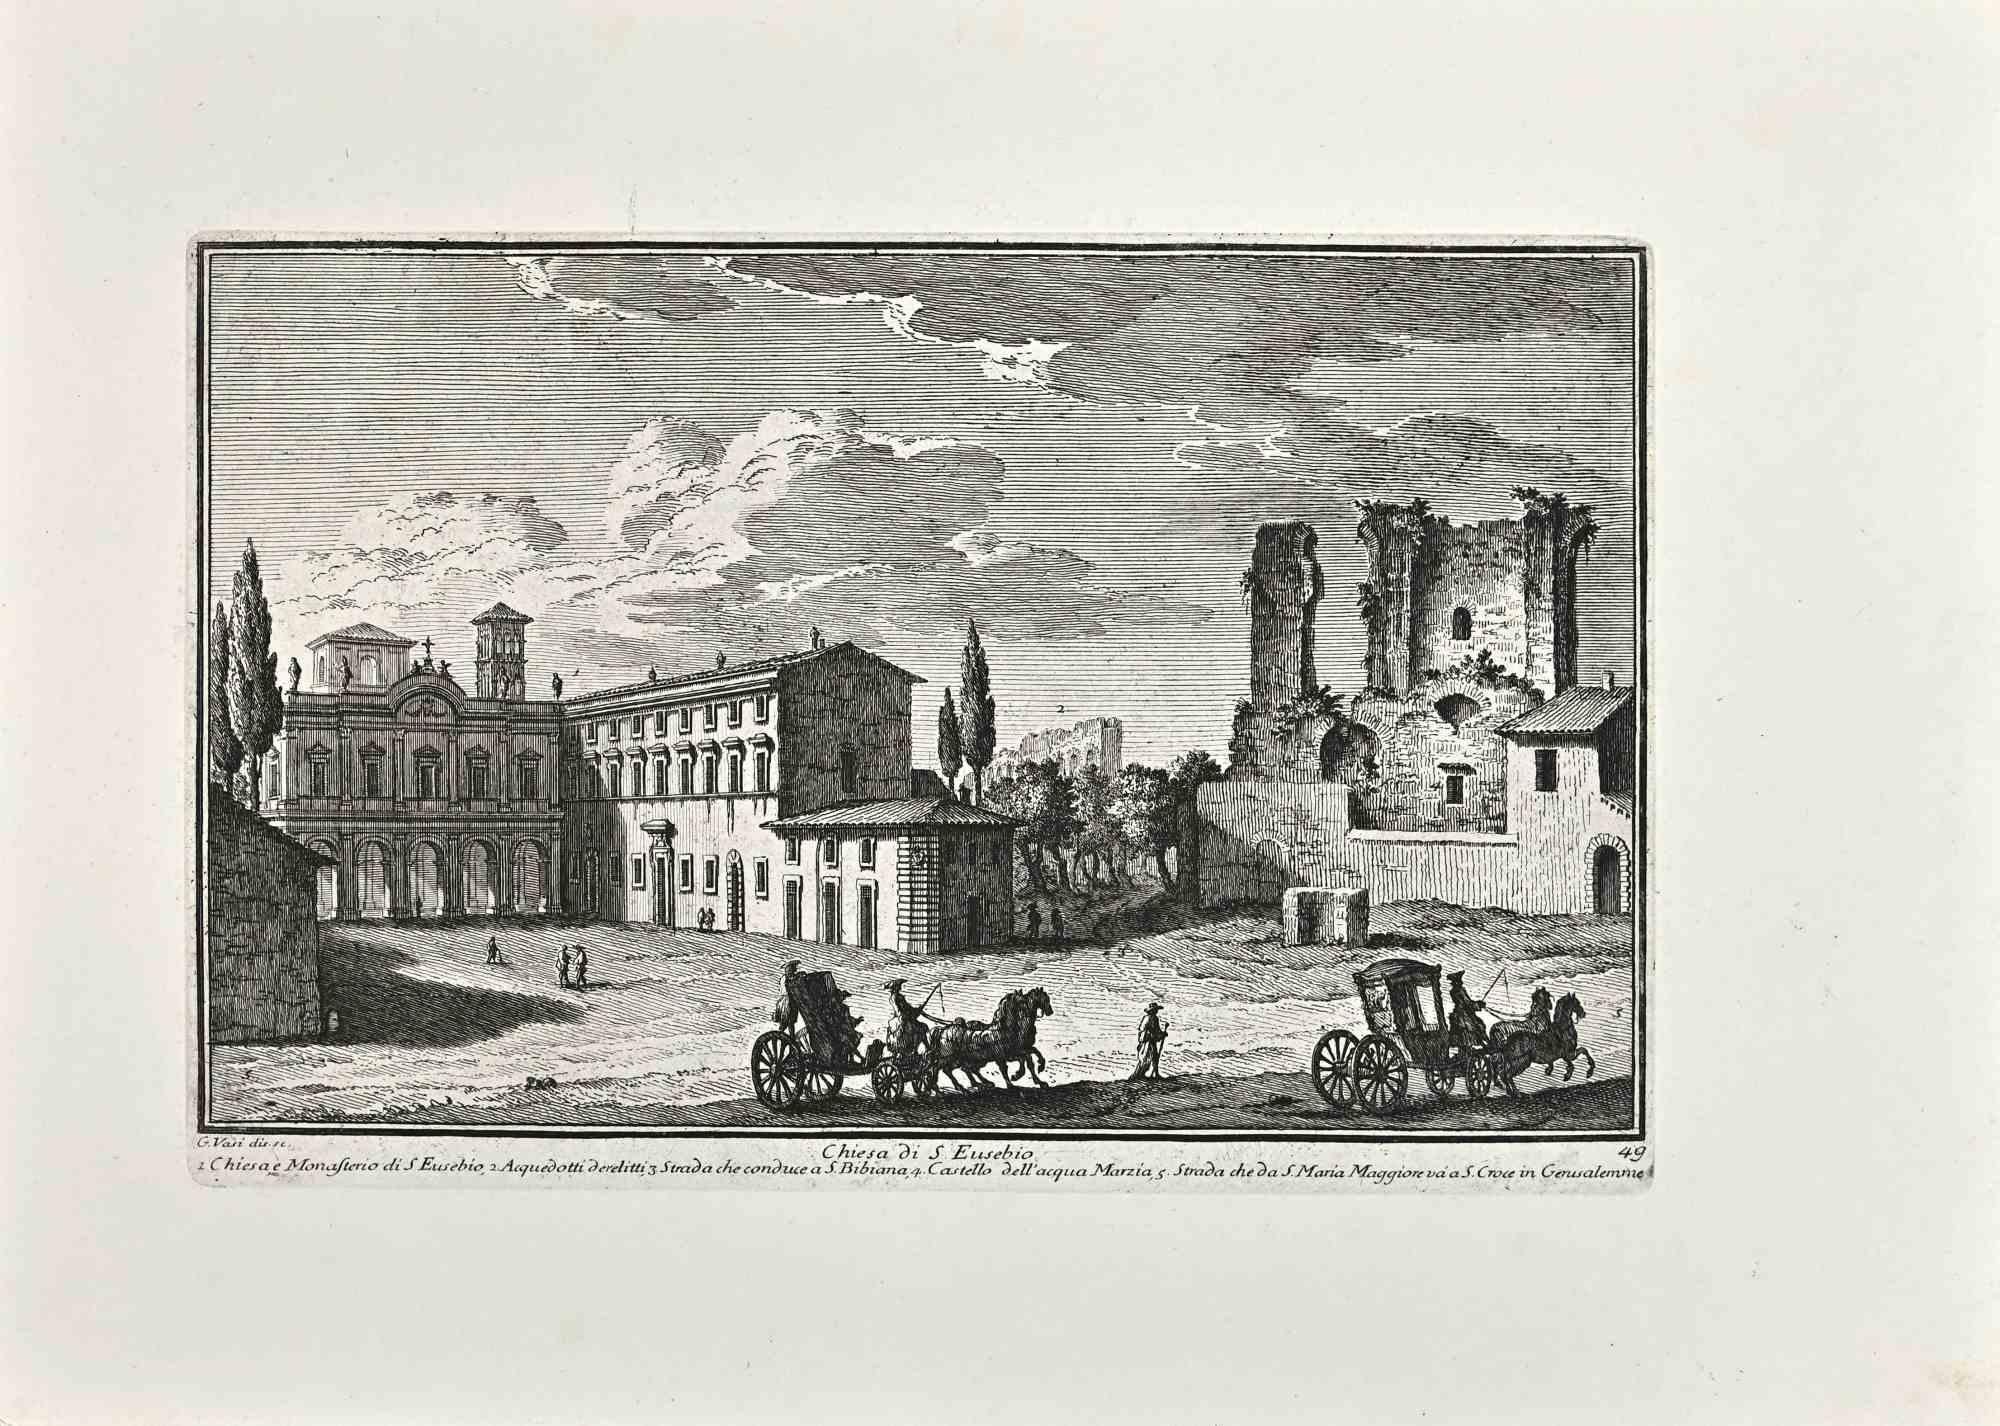 Chiesa di S.Eusebio is an original etching of the Late 18th century realized by Giuseppe Vasi.

Signed and titled on plate lower margin. 

Good conditions.

Giuseppe Vasi  (Corleone,1710 - Rome, 1782) was an engraver, architect, and landscape